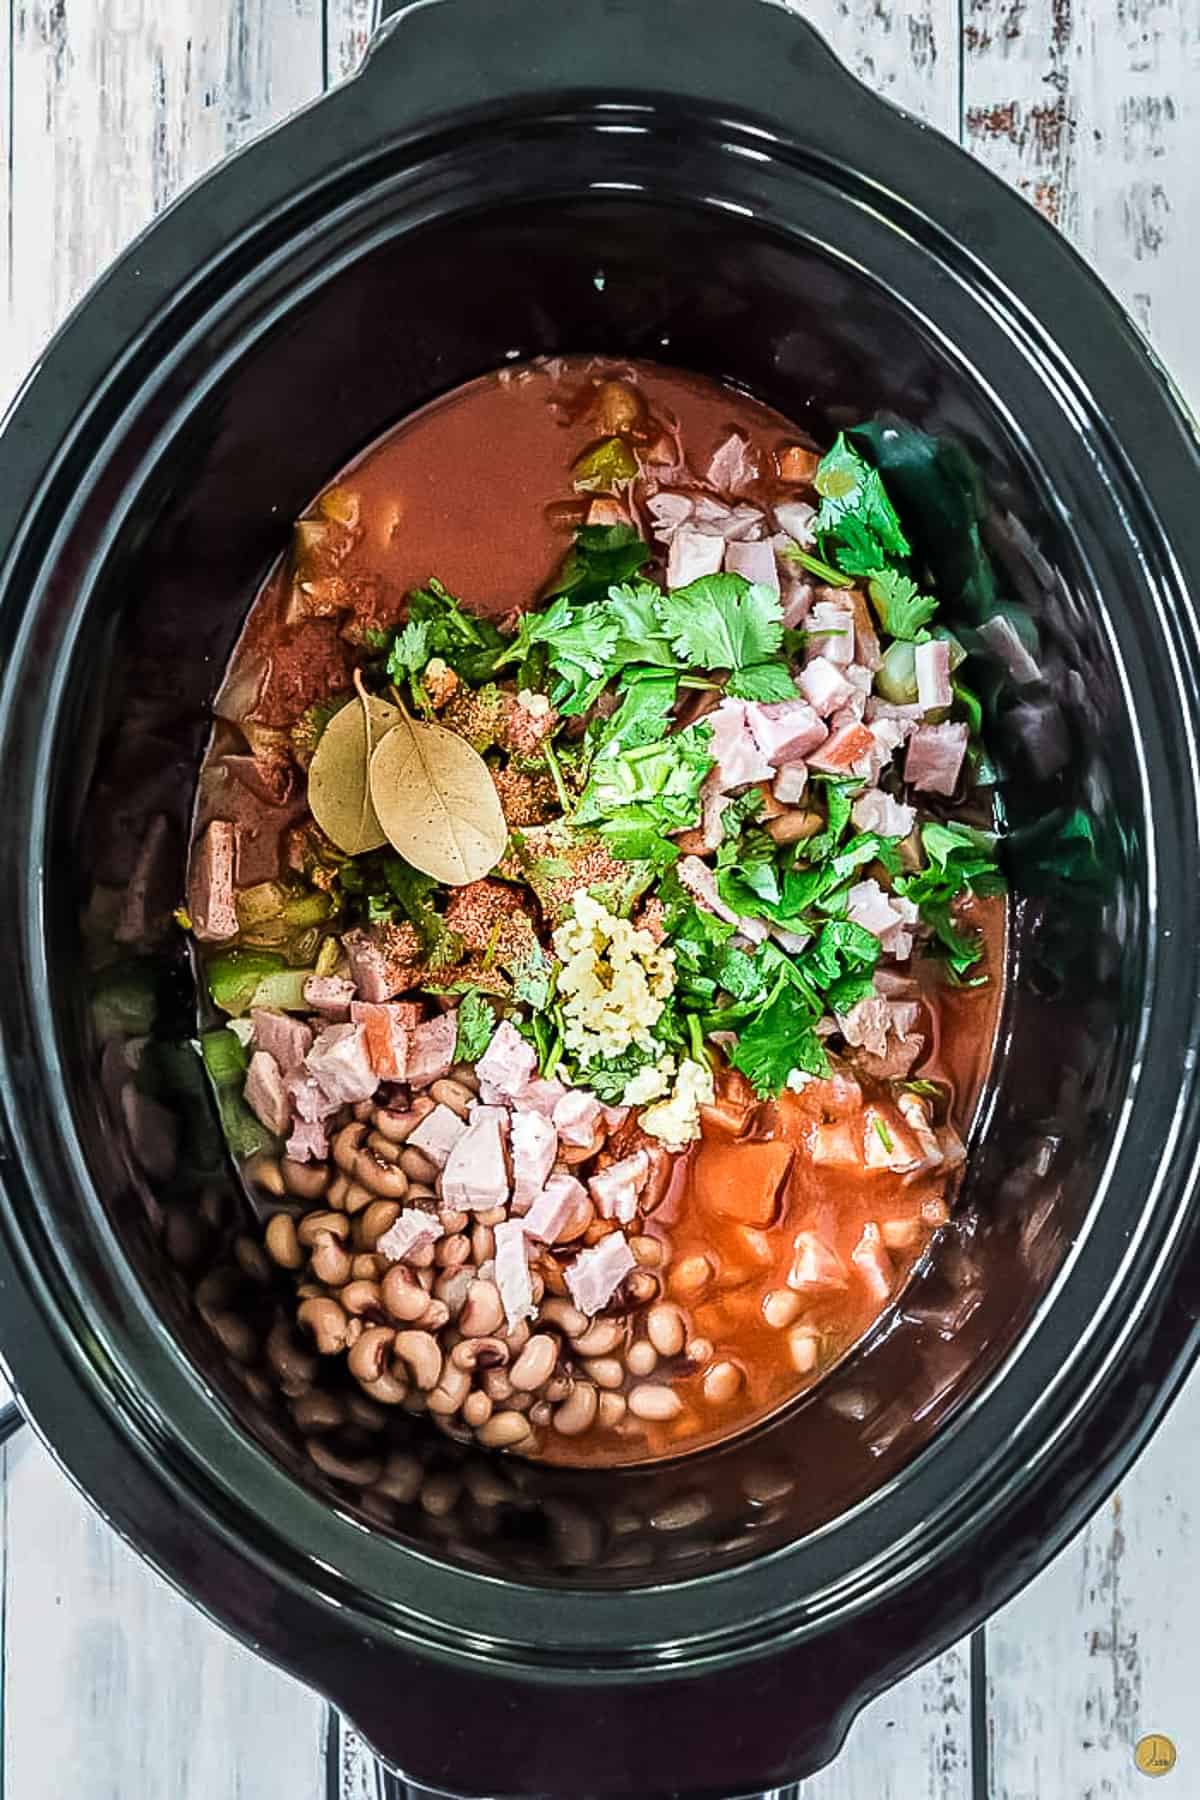 hoppin john uncooked in a pot